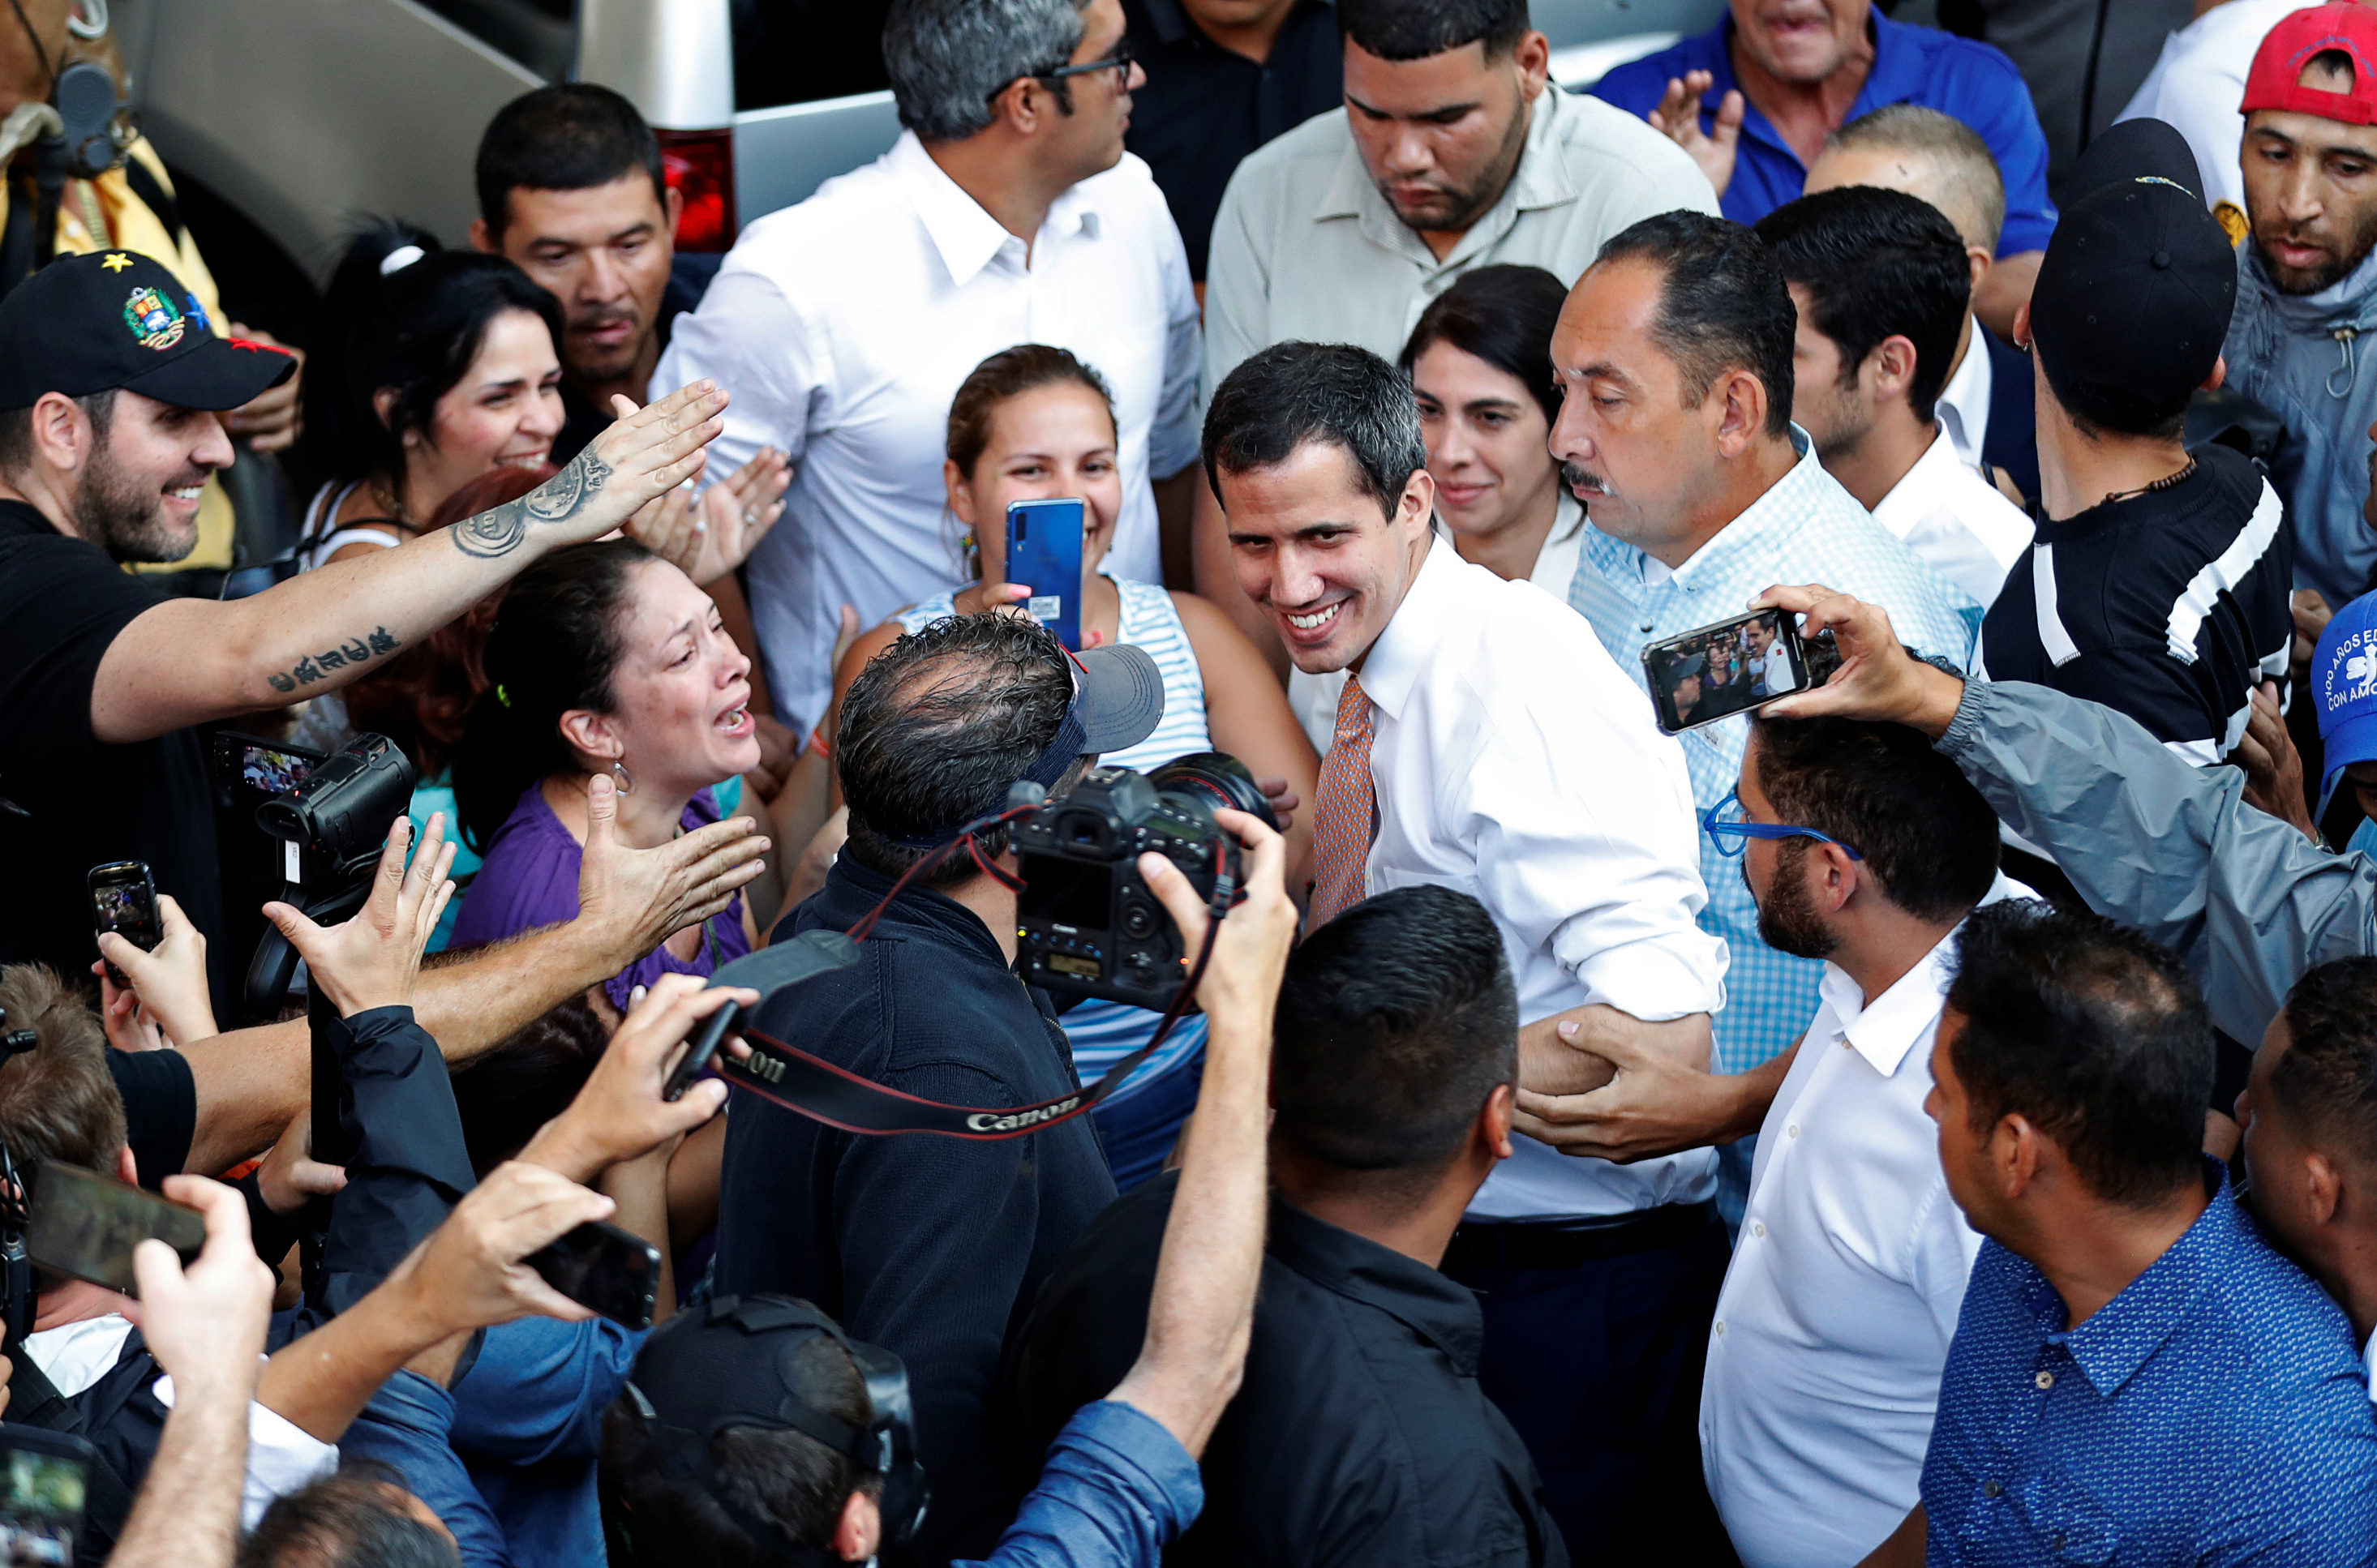 Venezuelan opposition leader Juan Guaido, who many nations have recognised as the country's rightful interim ruler, greets supporters during a gathering in Caracas, Venezuela April 1, 2019. REUTERS/Carlos Garcia Rawlins